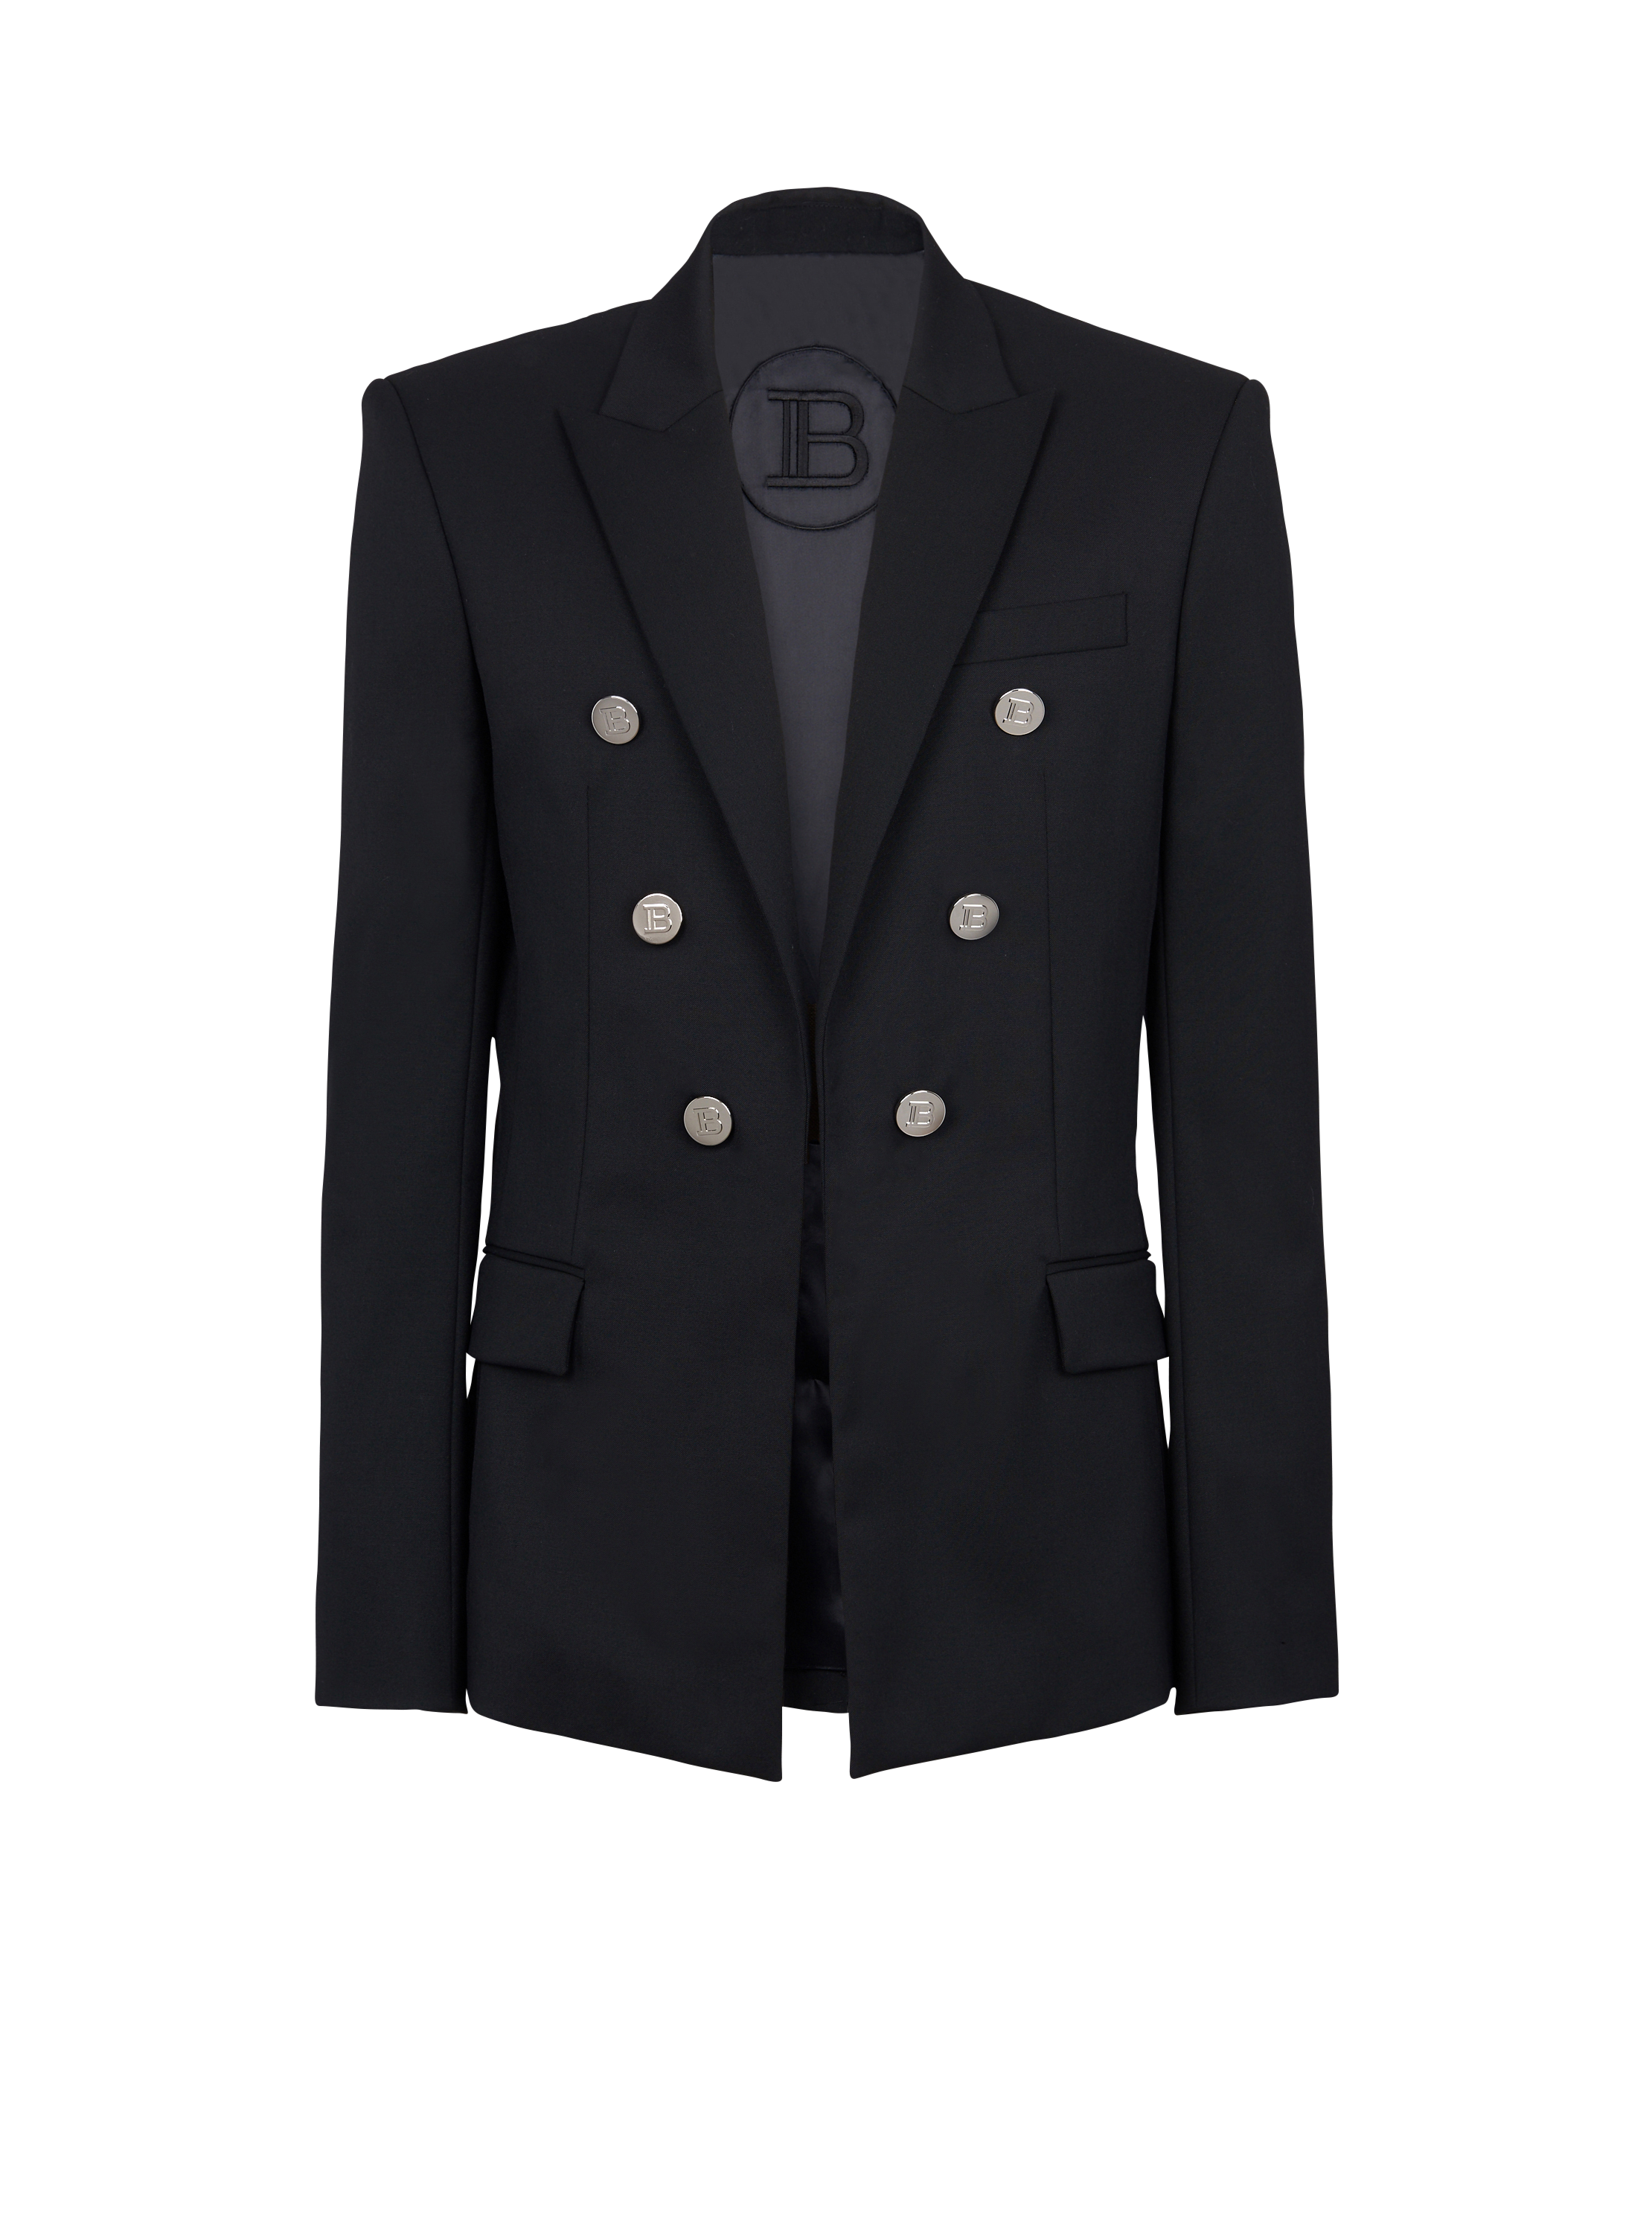 Double-breasted wool blazer, black, hi-res